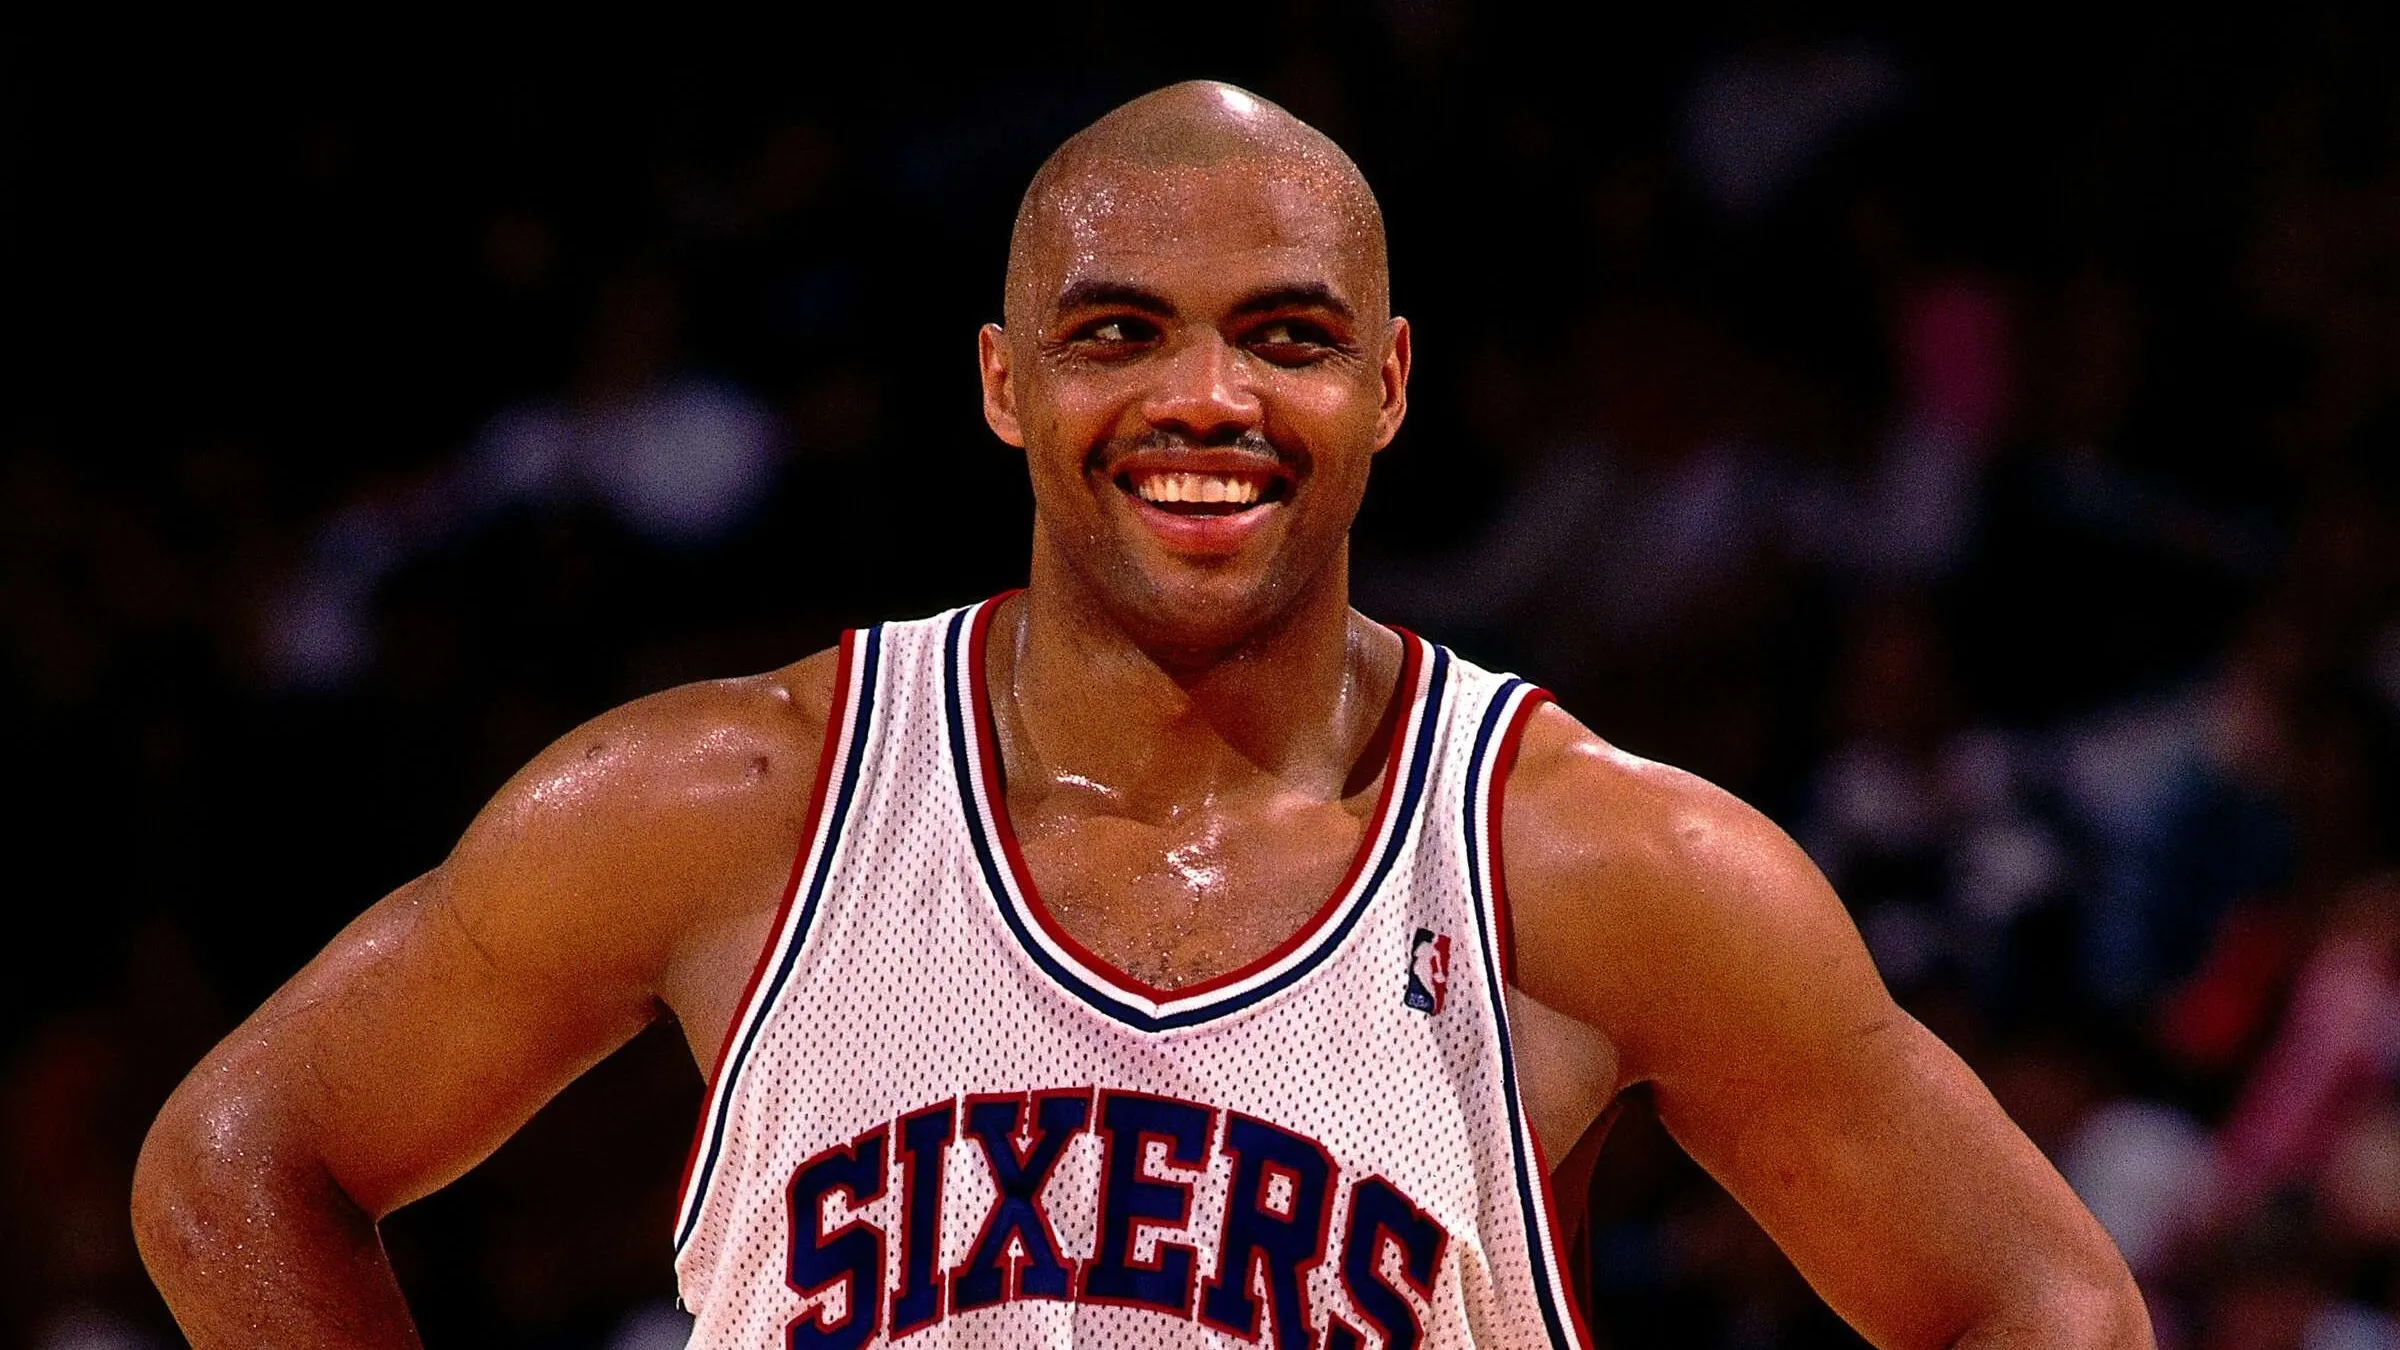 Charles Barkley Speaks Out as 'Inside the NBA' Faces Uncertain Future on TNT